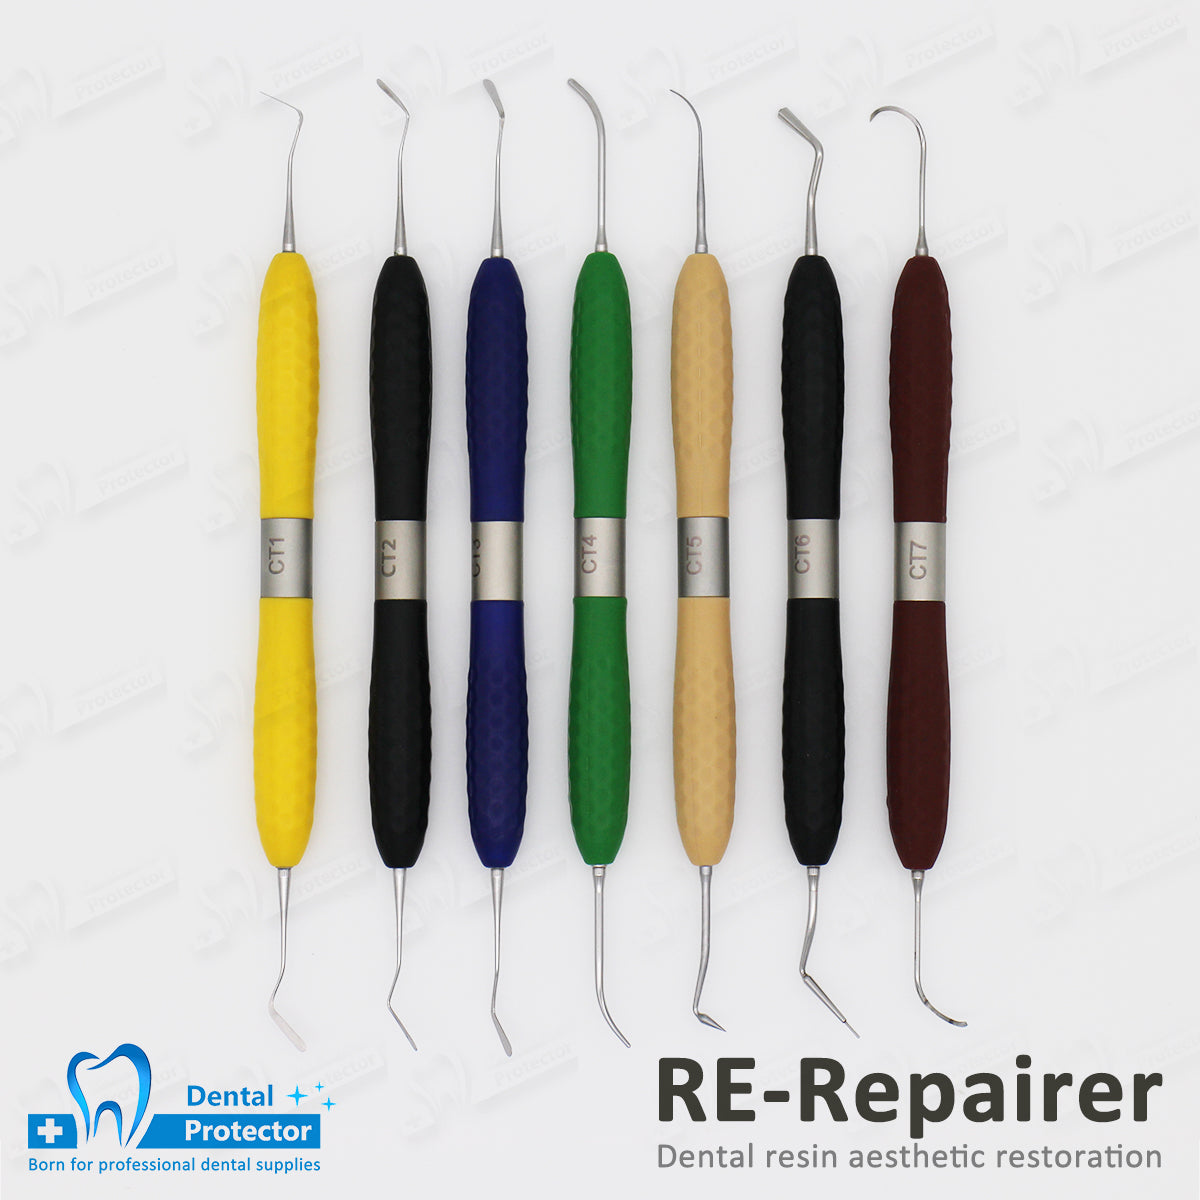 PROTECTOR RE-Repairer dental resin aesthetic restoration Resin sculpture tool Dental tools 7pcs with high temperature sterilization box